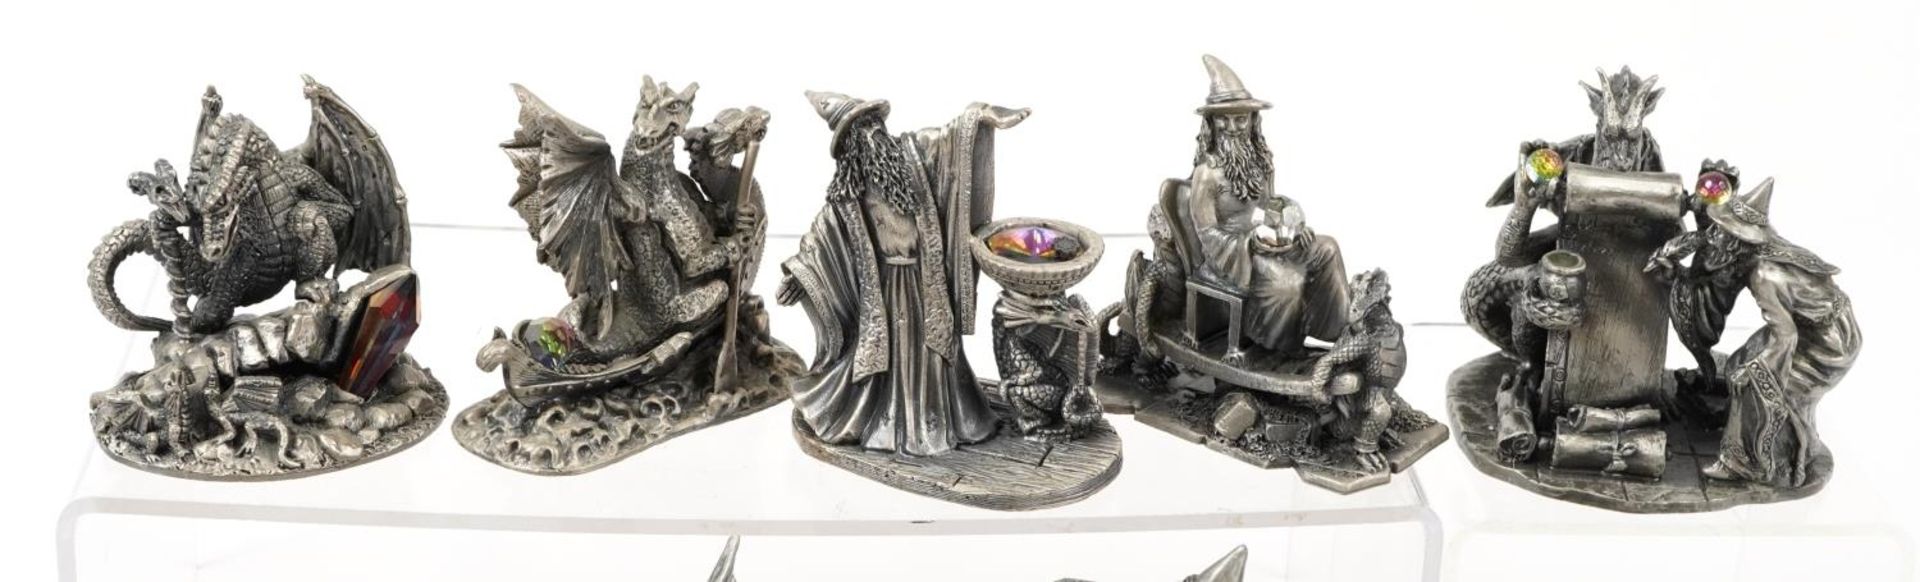 Fifteen Myth & Magic pewter figures including Collector's Club and Loyalty Studio editions, the - Image 2 of 5